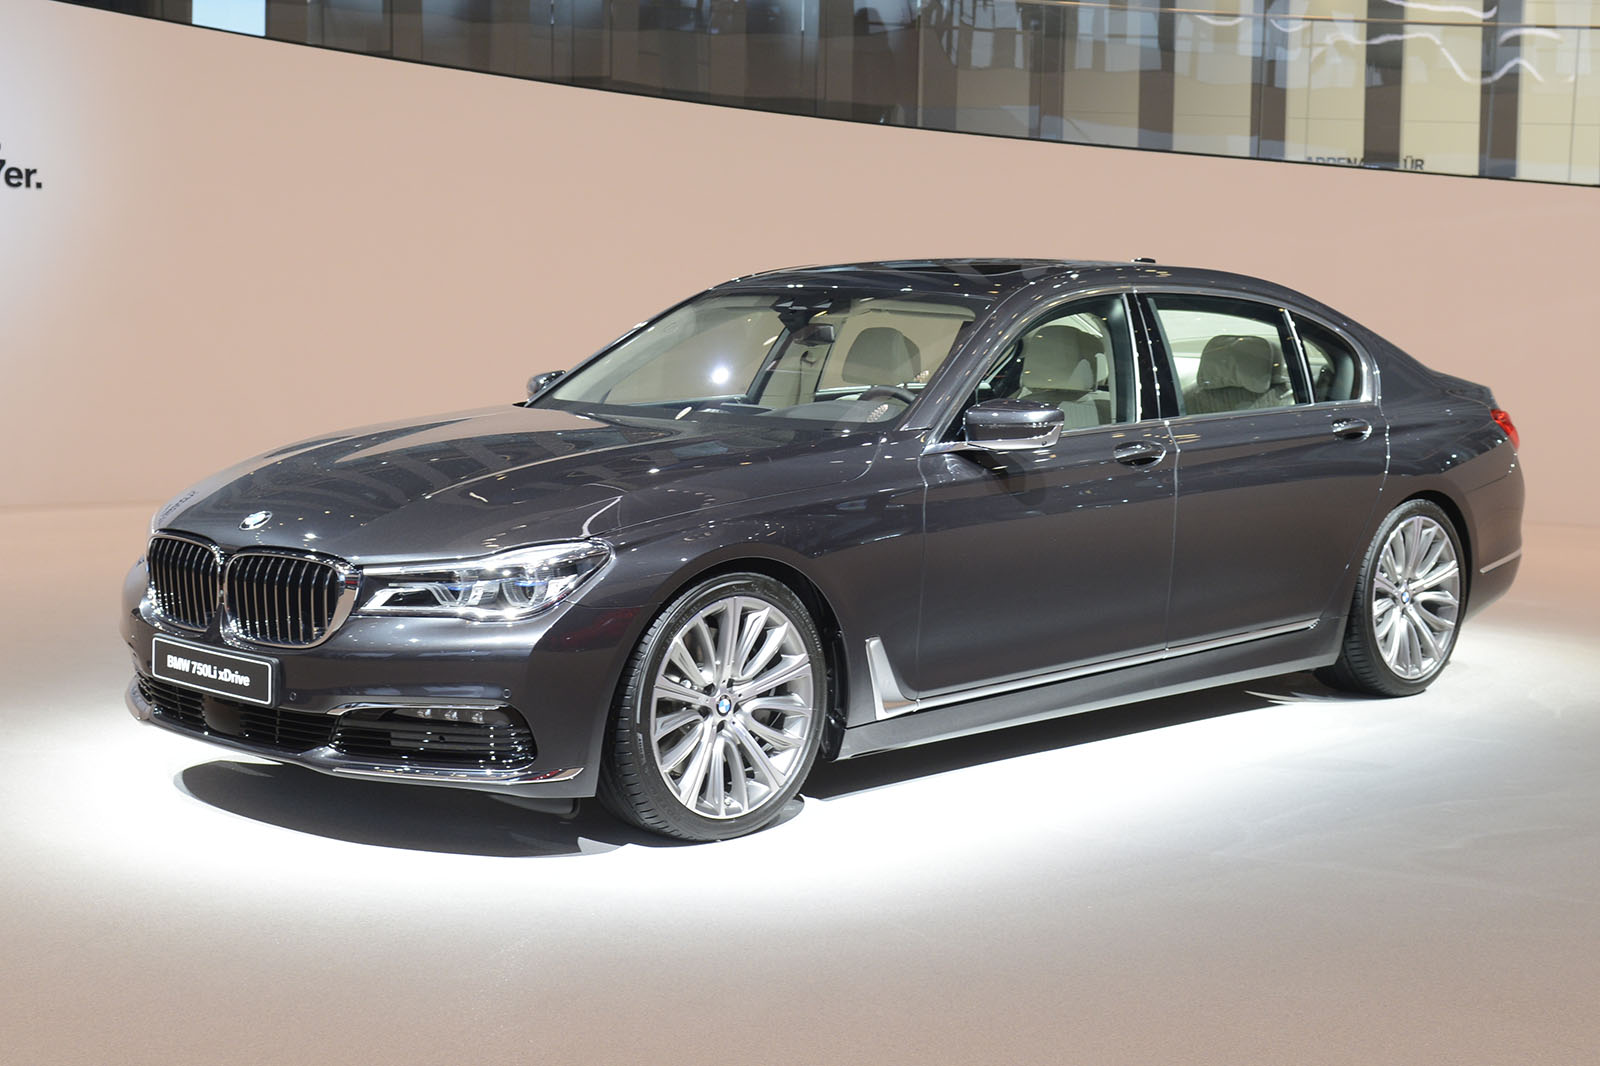 2015 BMW 7 Series - latest pictures, reveal date and engine information